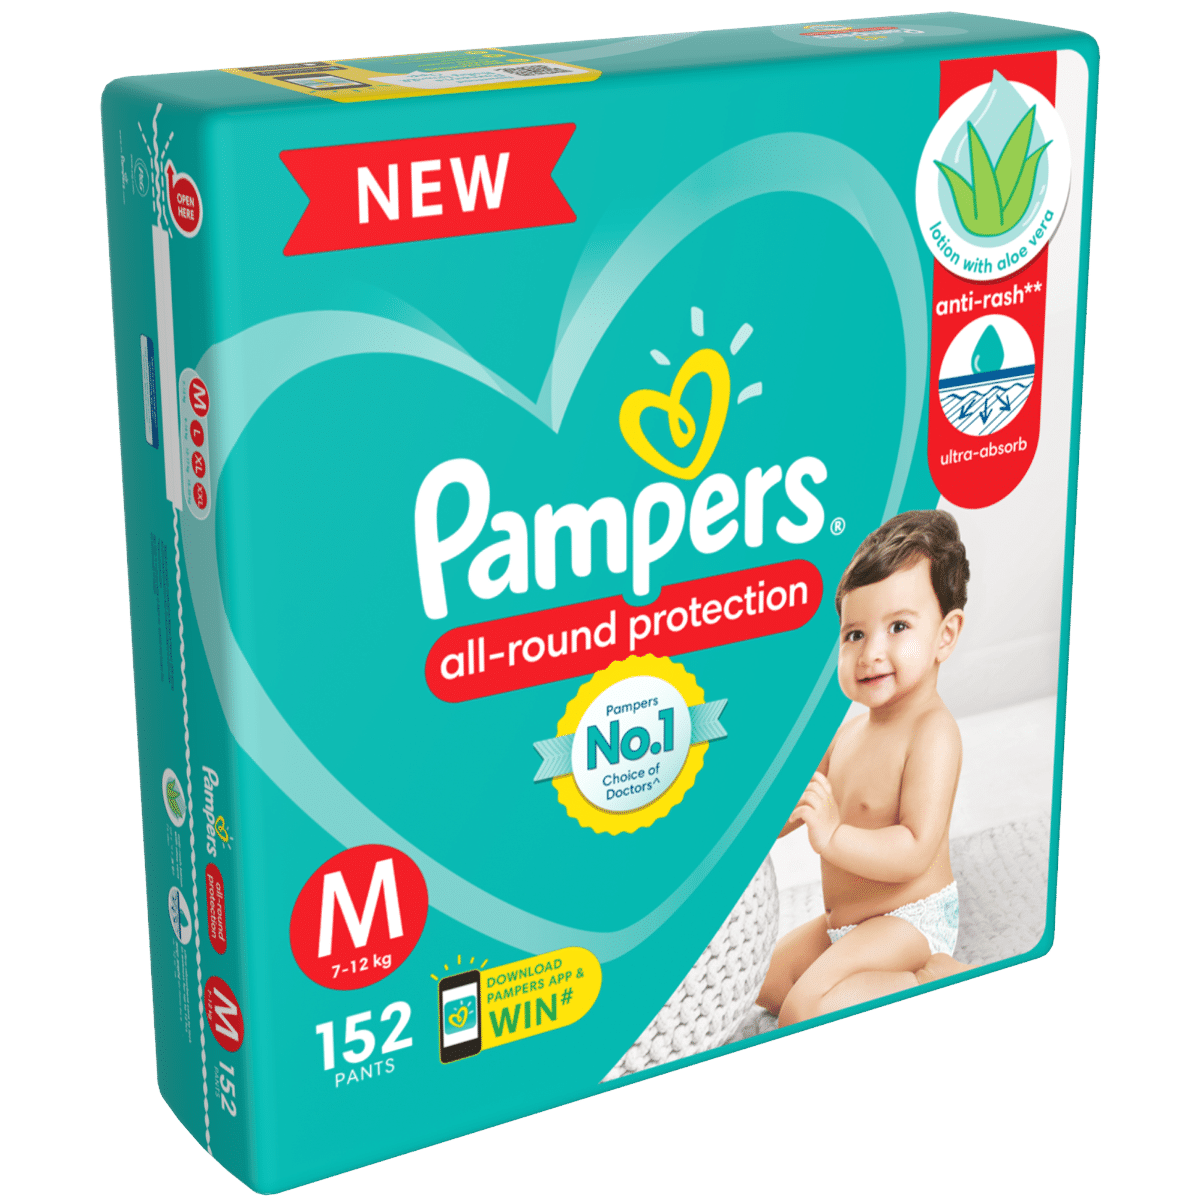 Pampers All-Round Protection Diaper Pants Medium, 152 Count, Pack of 1 